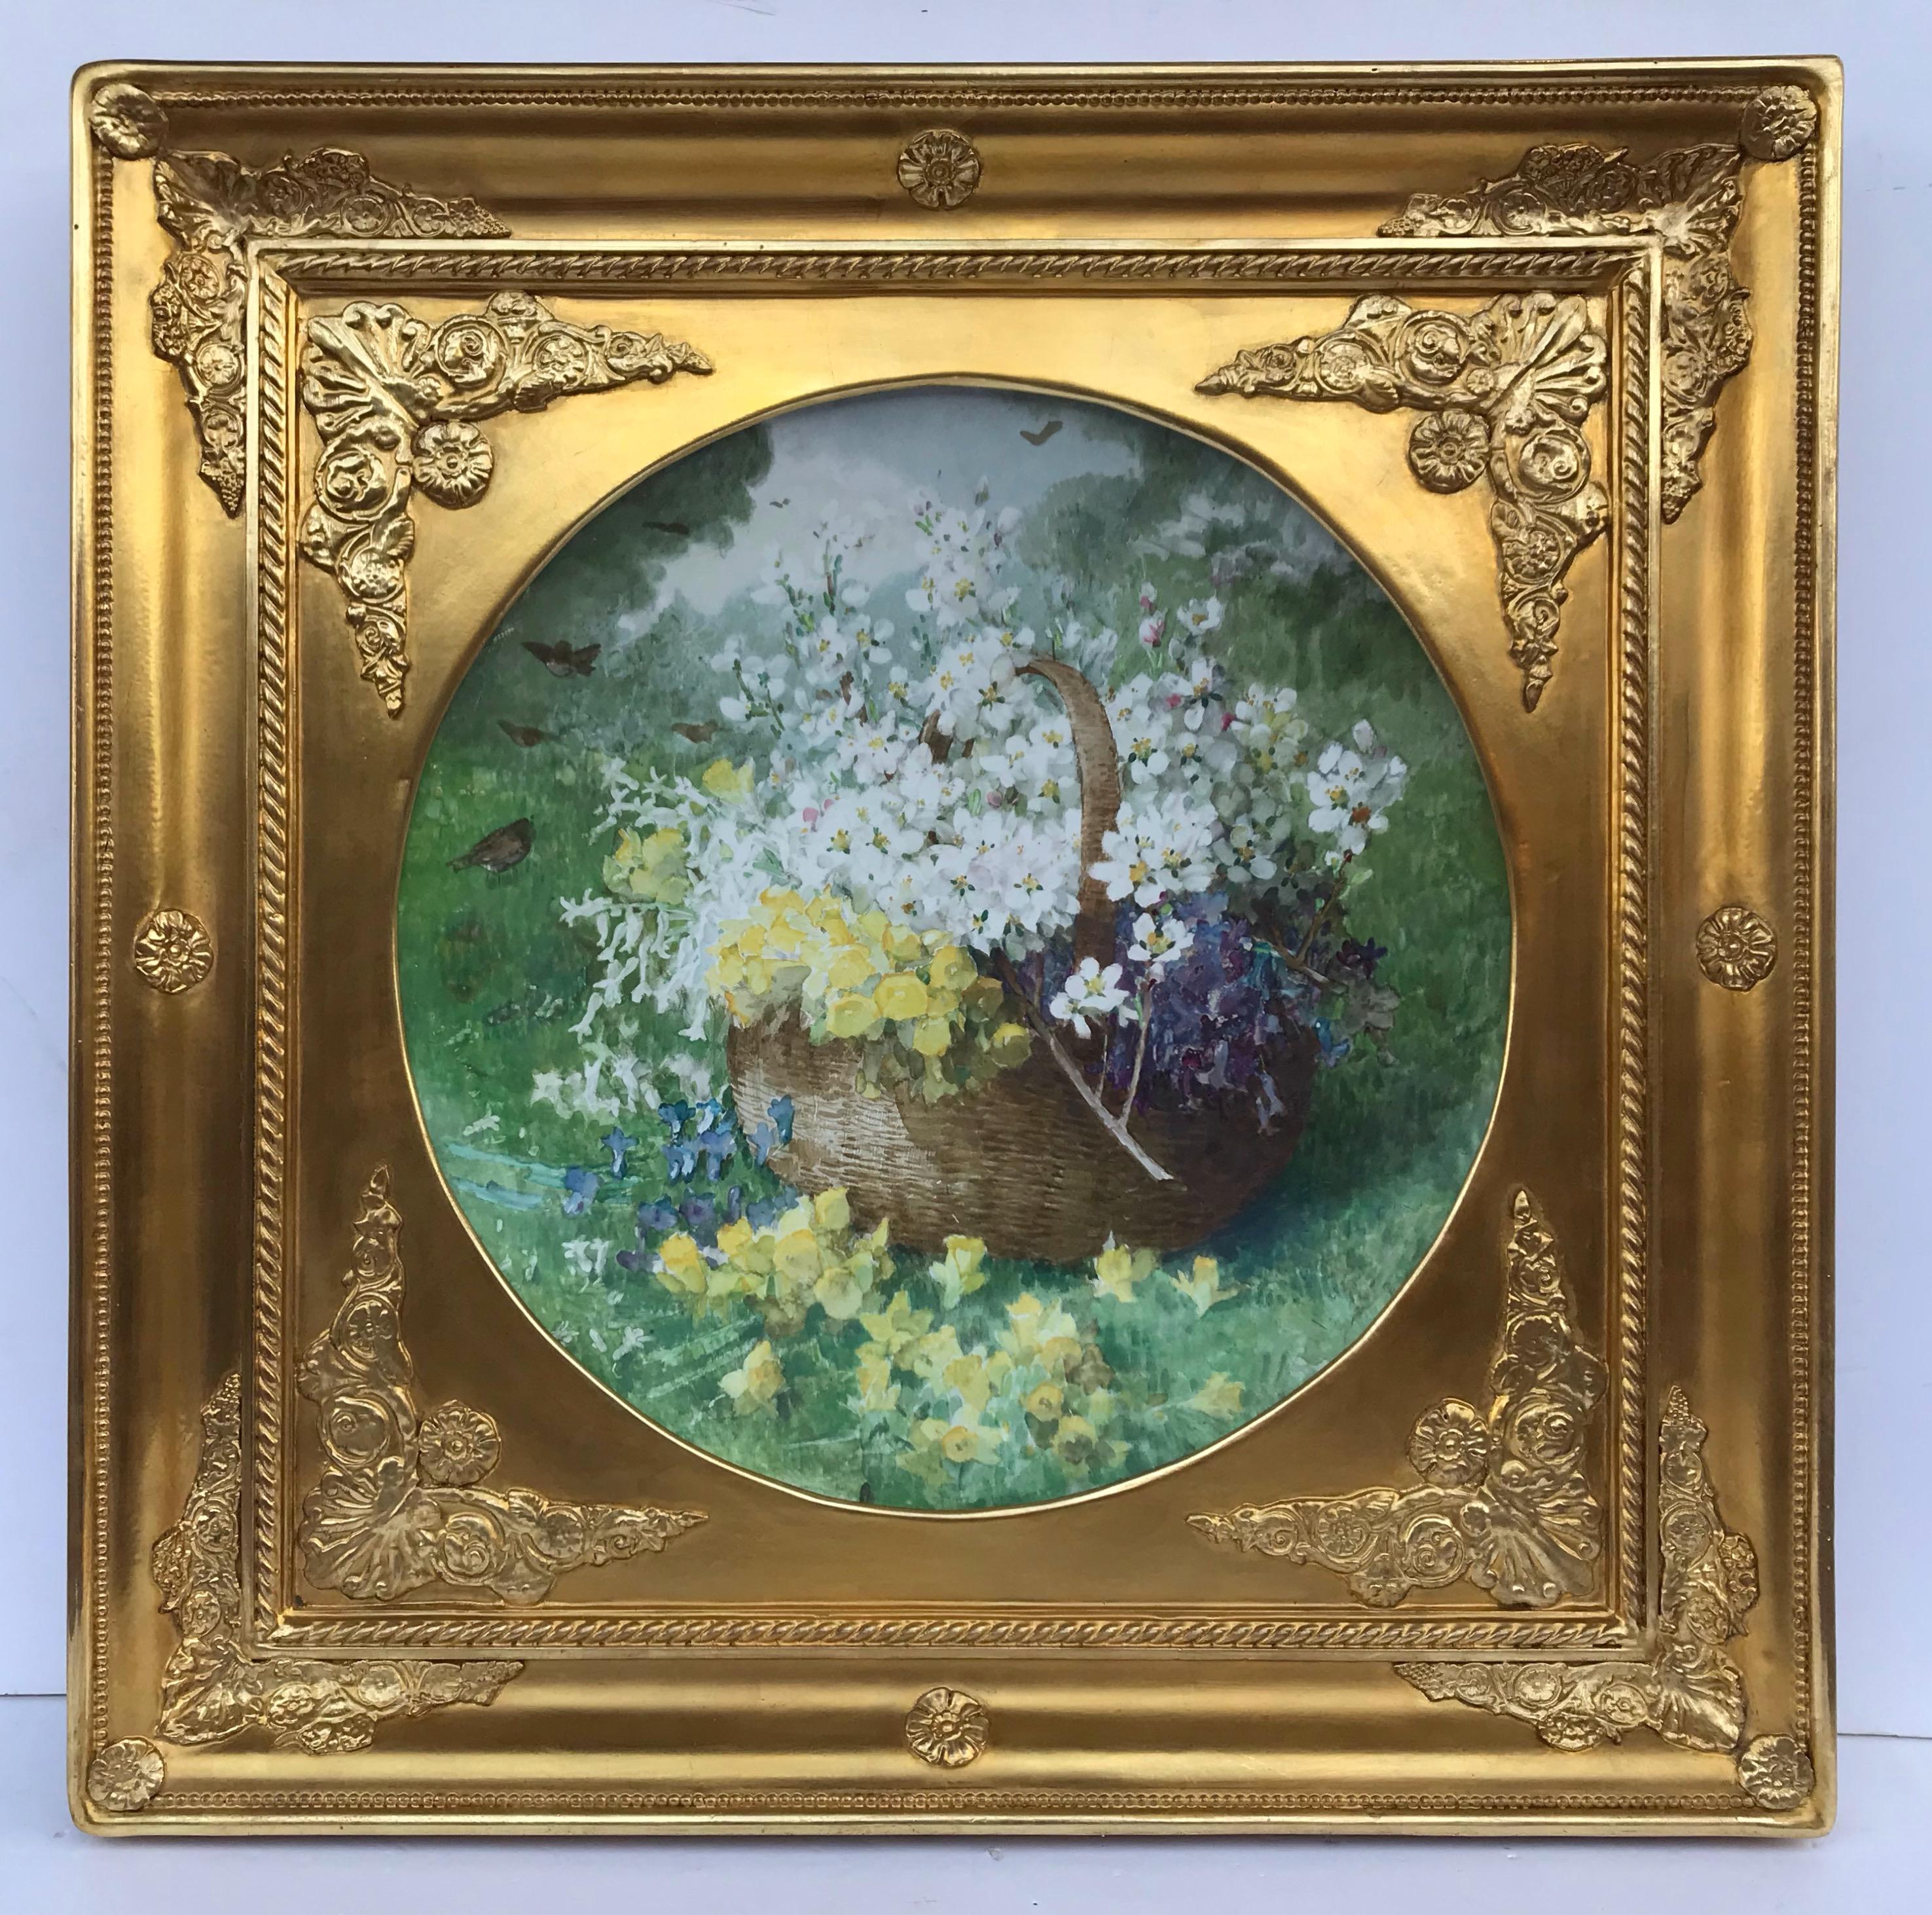 QUOST Ernest Still-Life Painting - Flowers Painting on Porcelain Plate